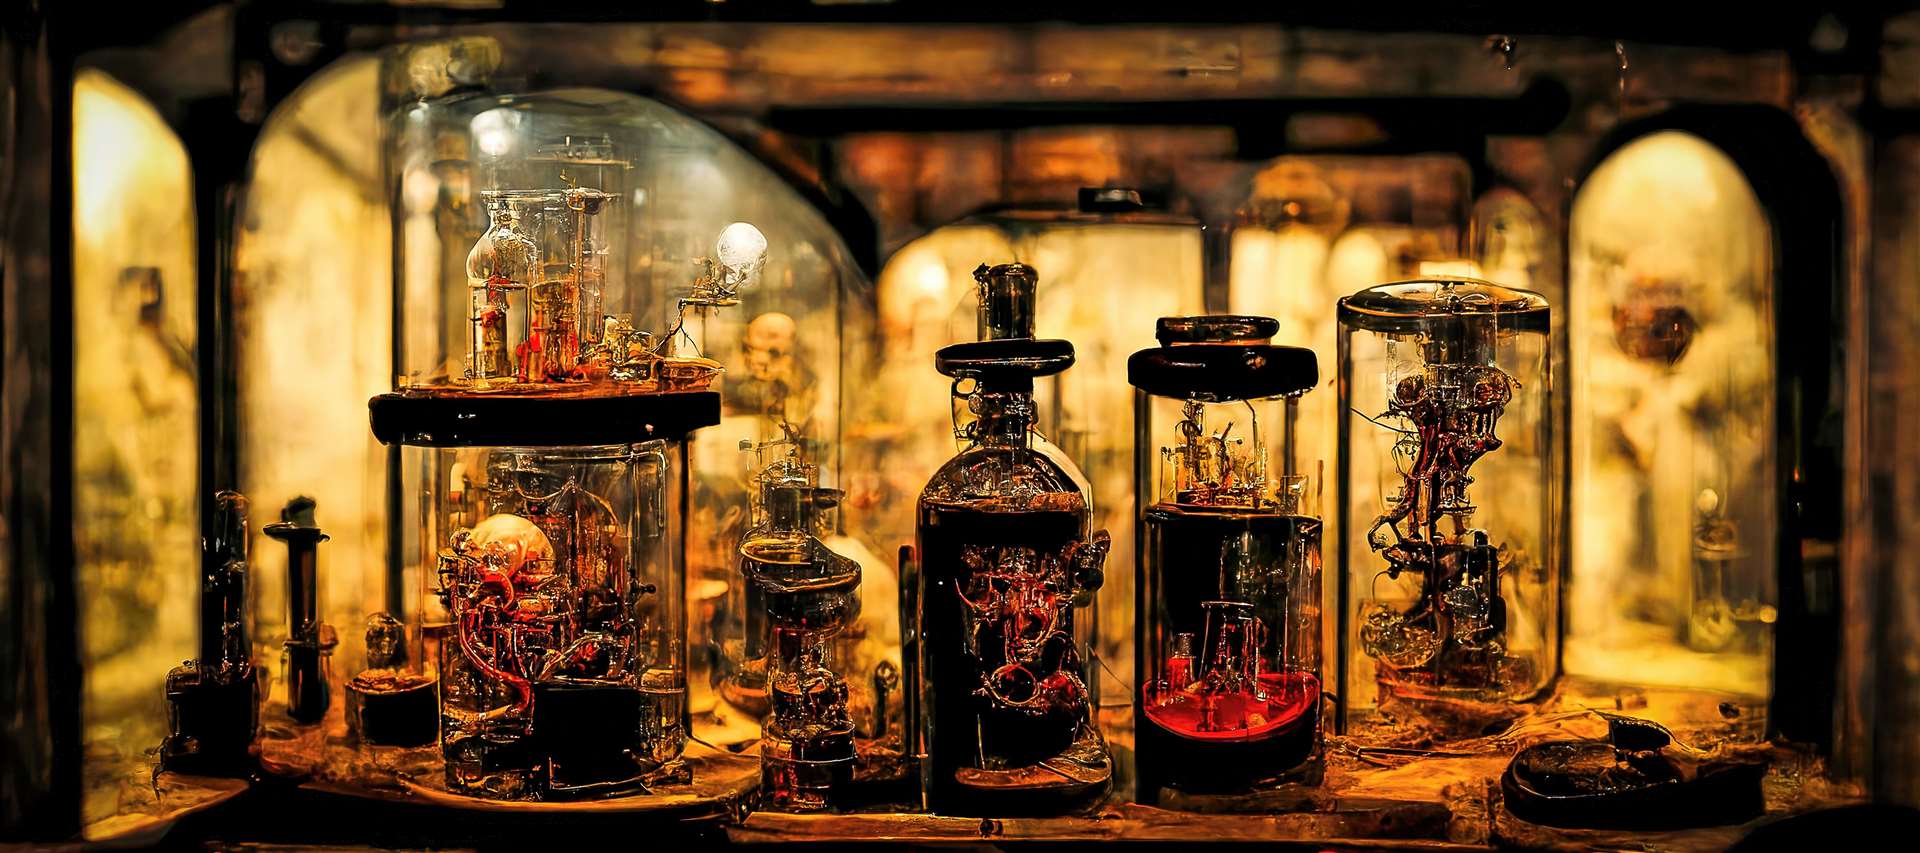 The author says that horror anthologies like Guillermo del Torro’s Cabinet of Curiosities are back in vogue.